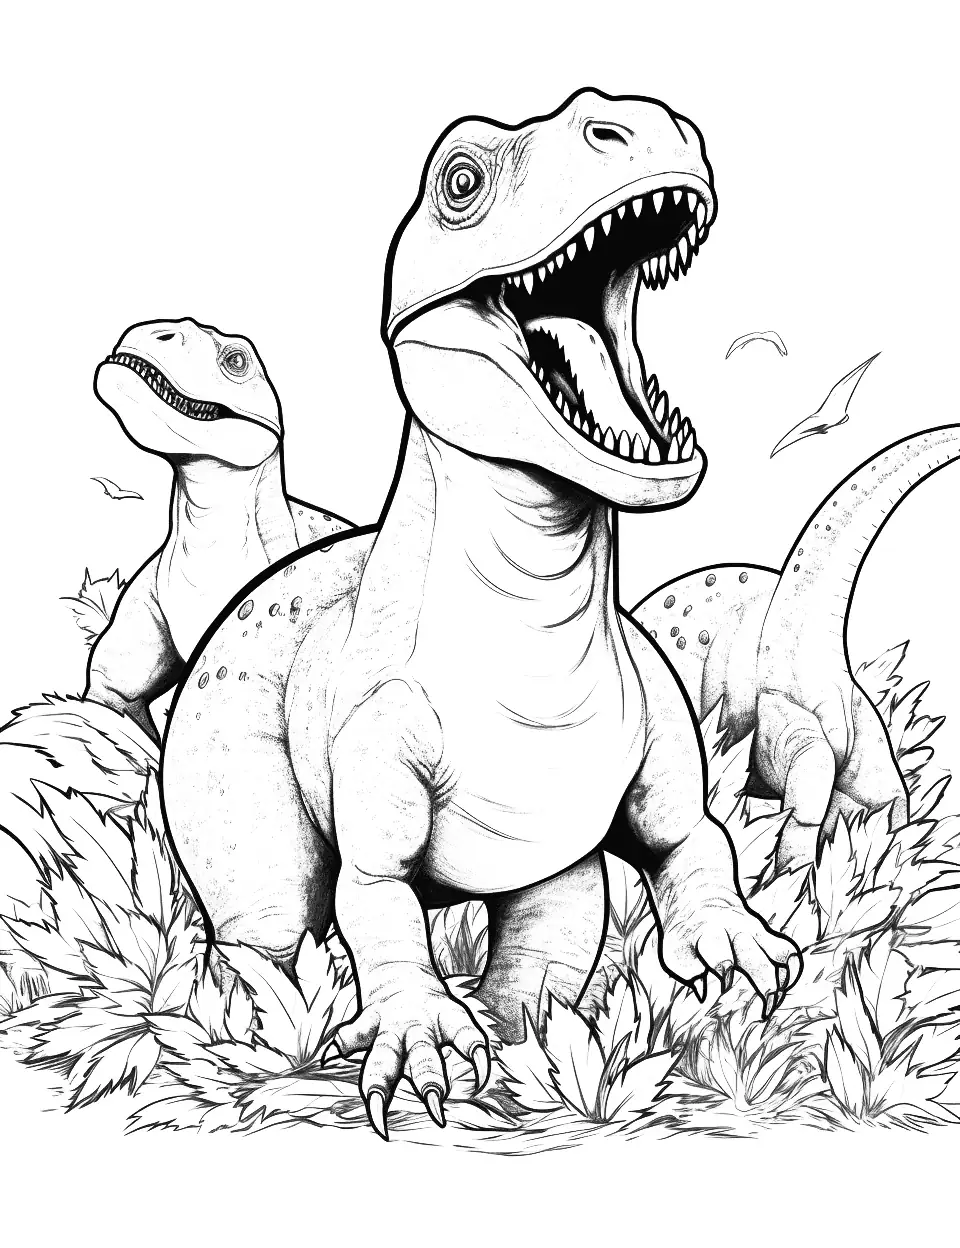 Raptor Pack in Action Dinosaur Coloring Page - The Velociraptor pack in an action scene from Jurassic World.